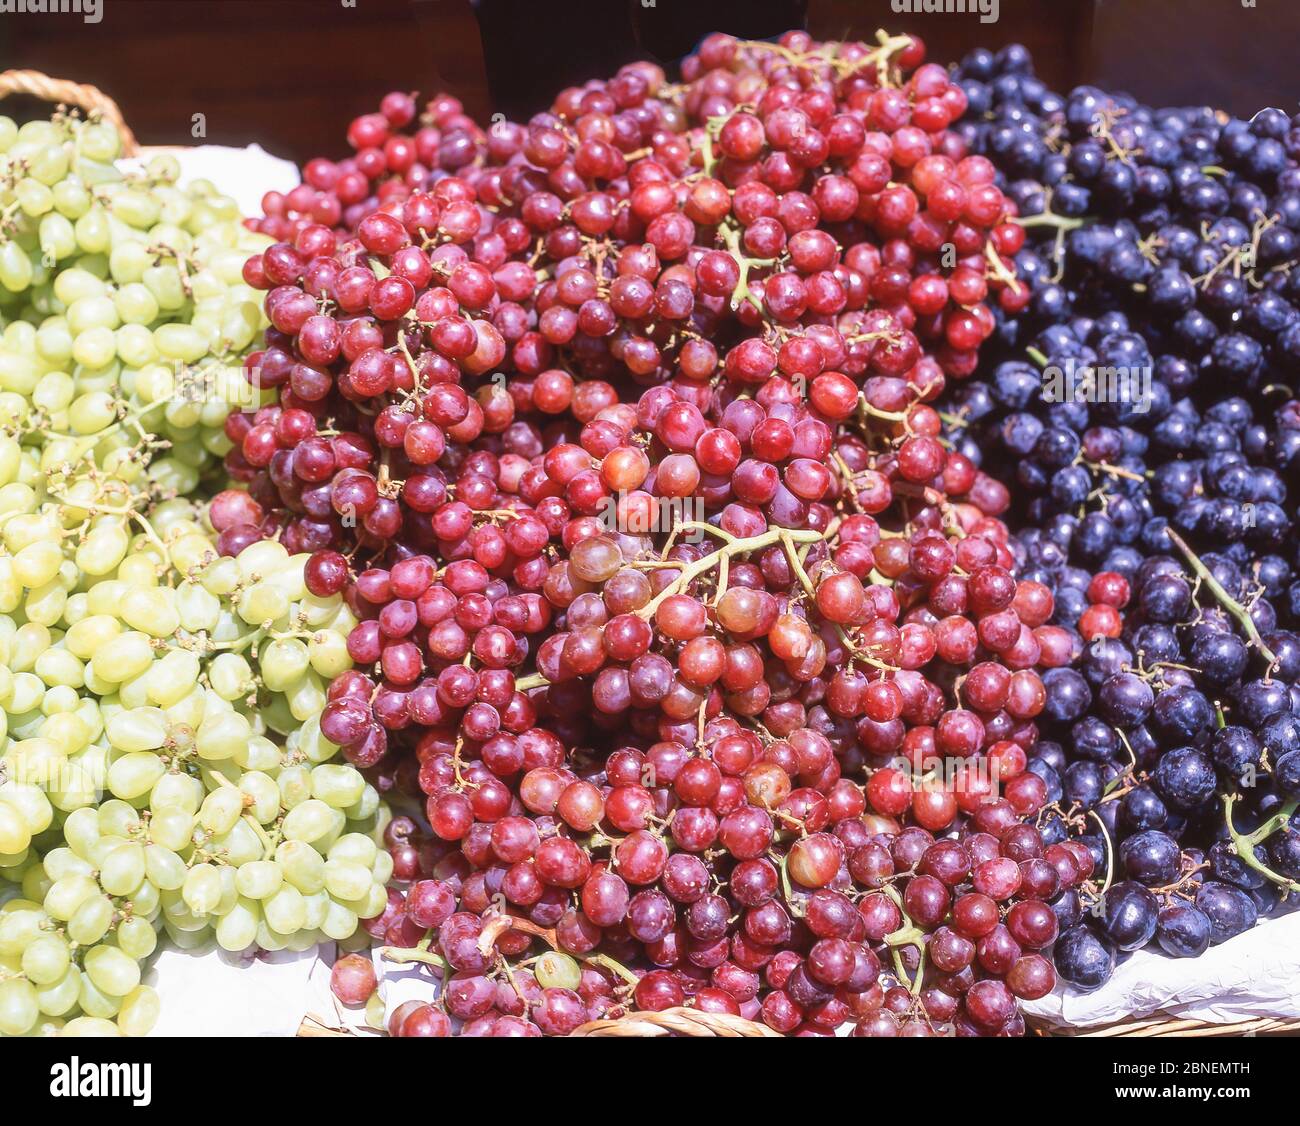 Bunches of grapes on market stall, Berwick Street Market, Soho, West End, City of Westminster, Greater London, England, United Kingdom Stock Photo